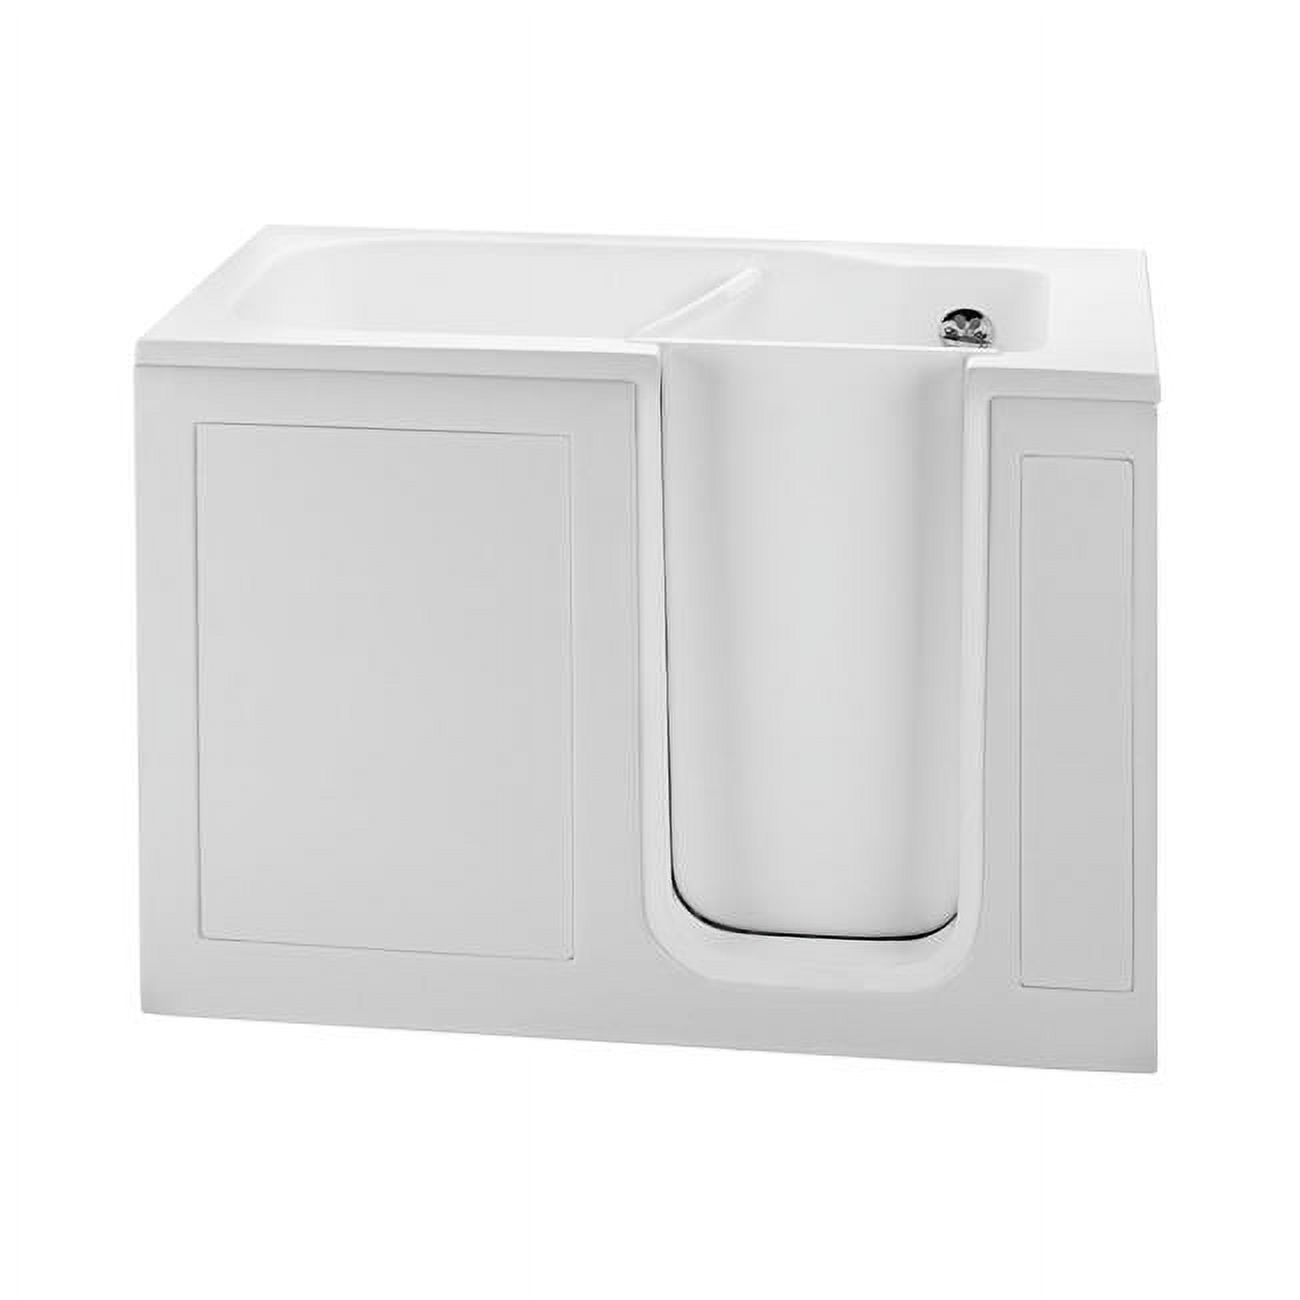 Walk in Soaking Bath with Valves, White - 51.5 x 30.25 x 37.5 in. - image 1 of 1